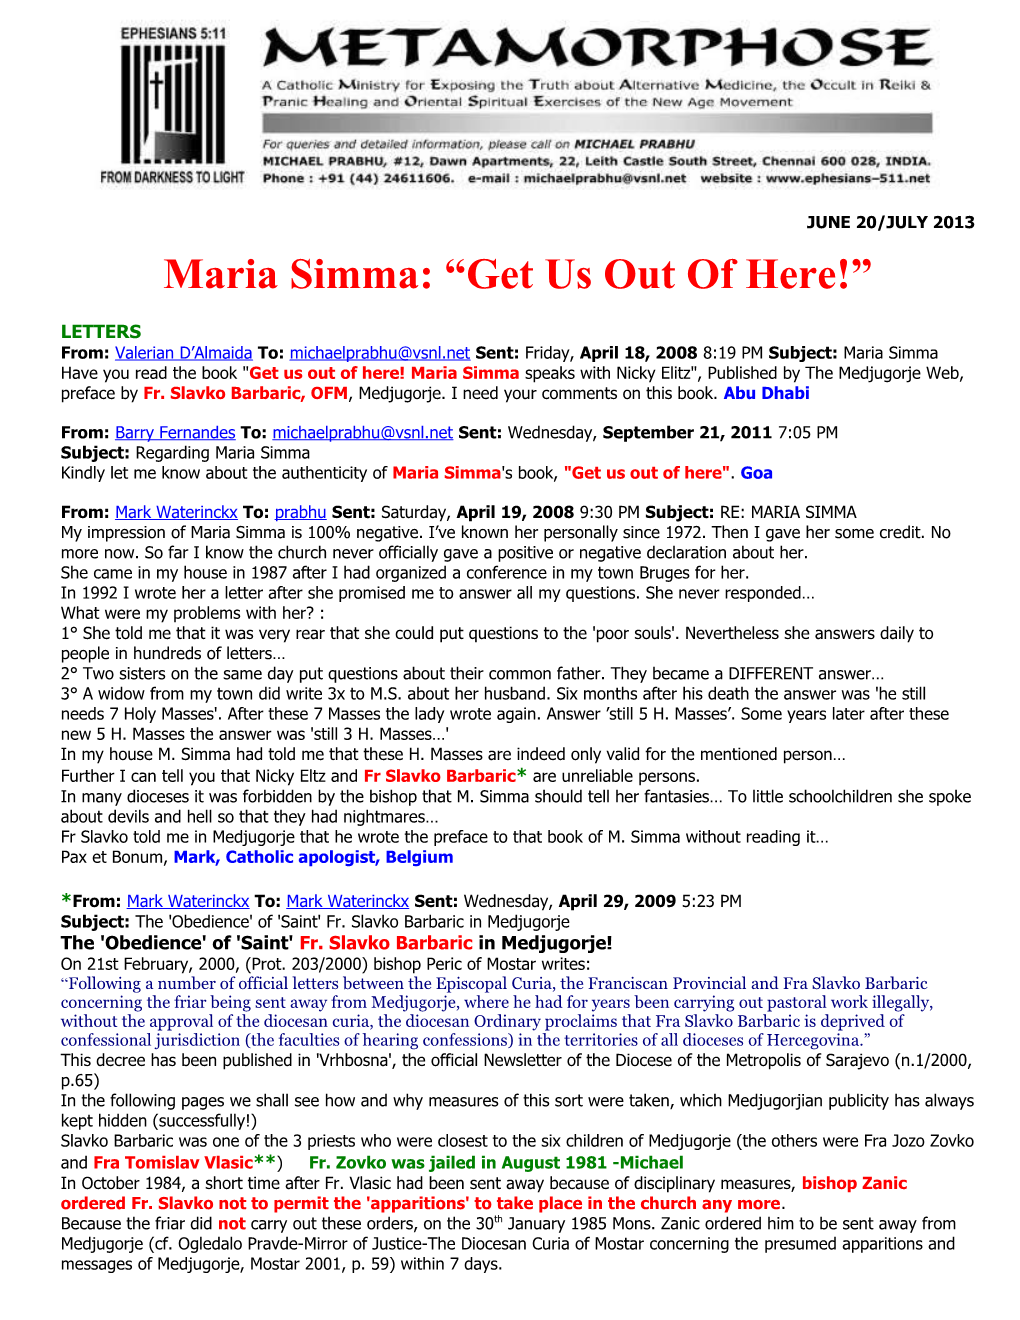 Maria Simma: Get Us out of Here!